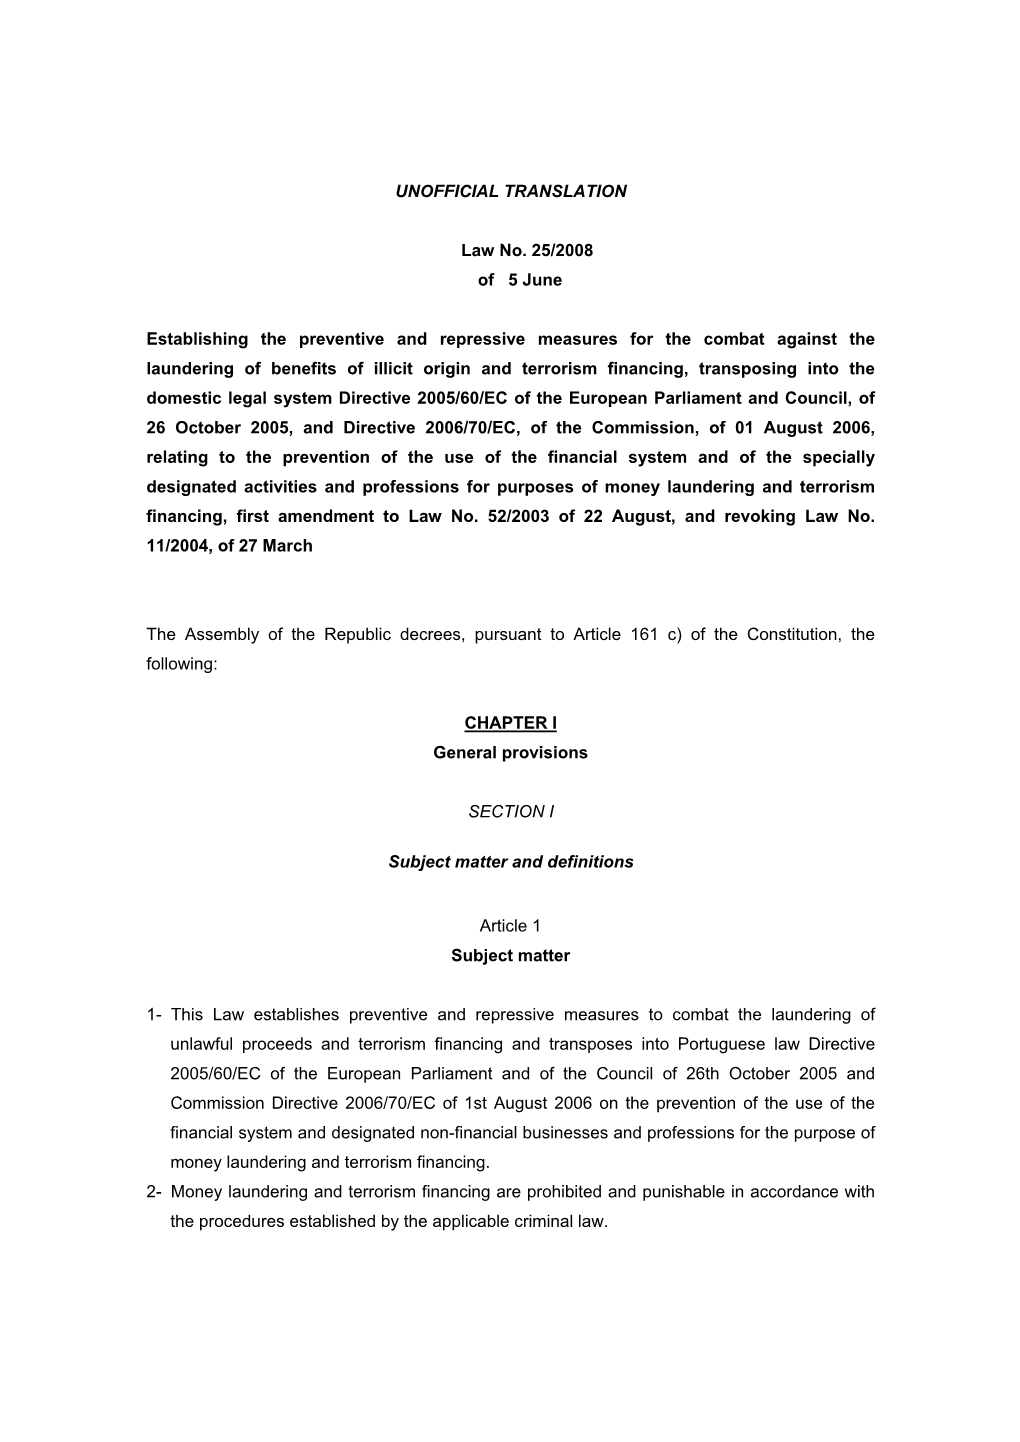 UNOFFICIAL TRANSLATION Law No. 25/2008 of 5 June Establishing The